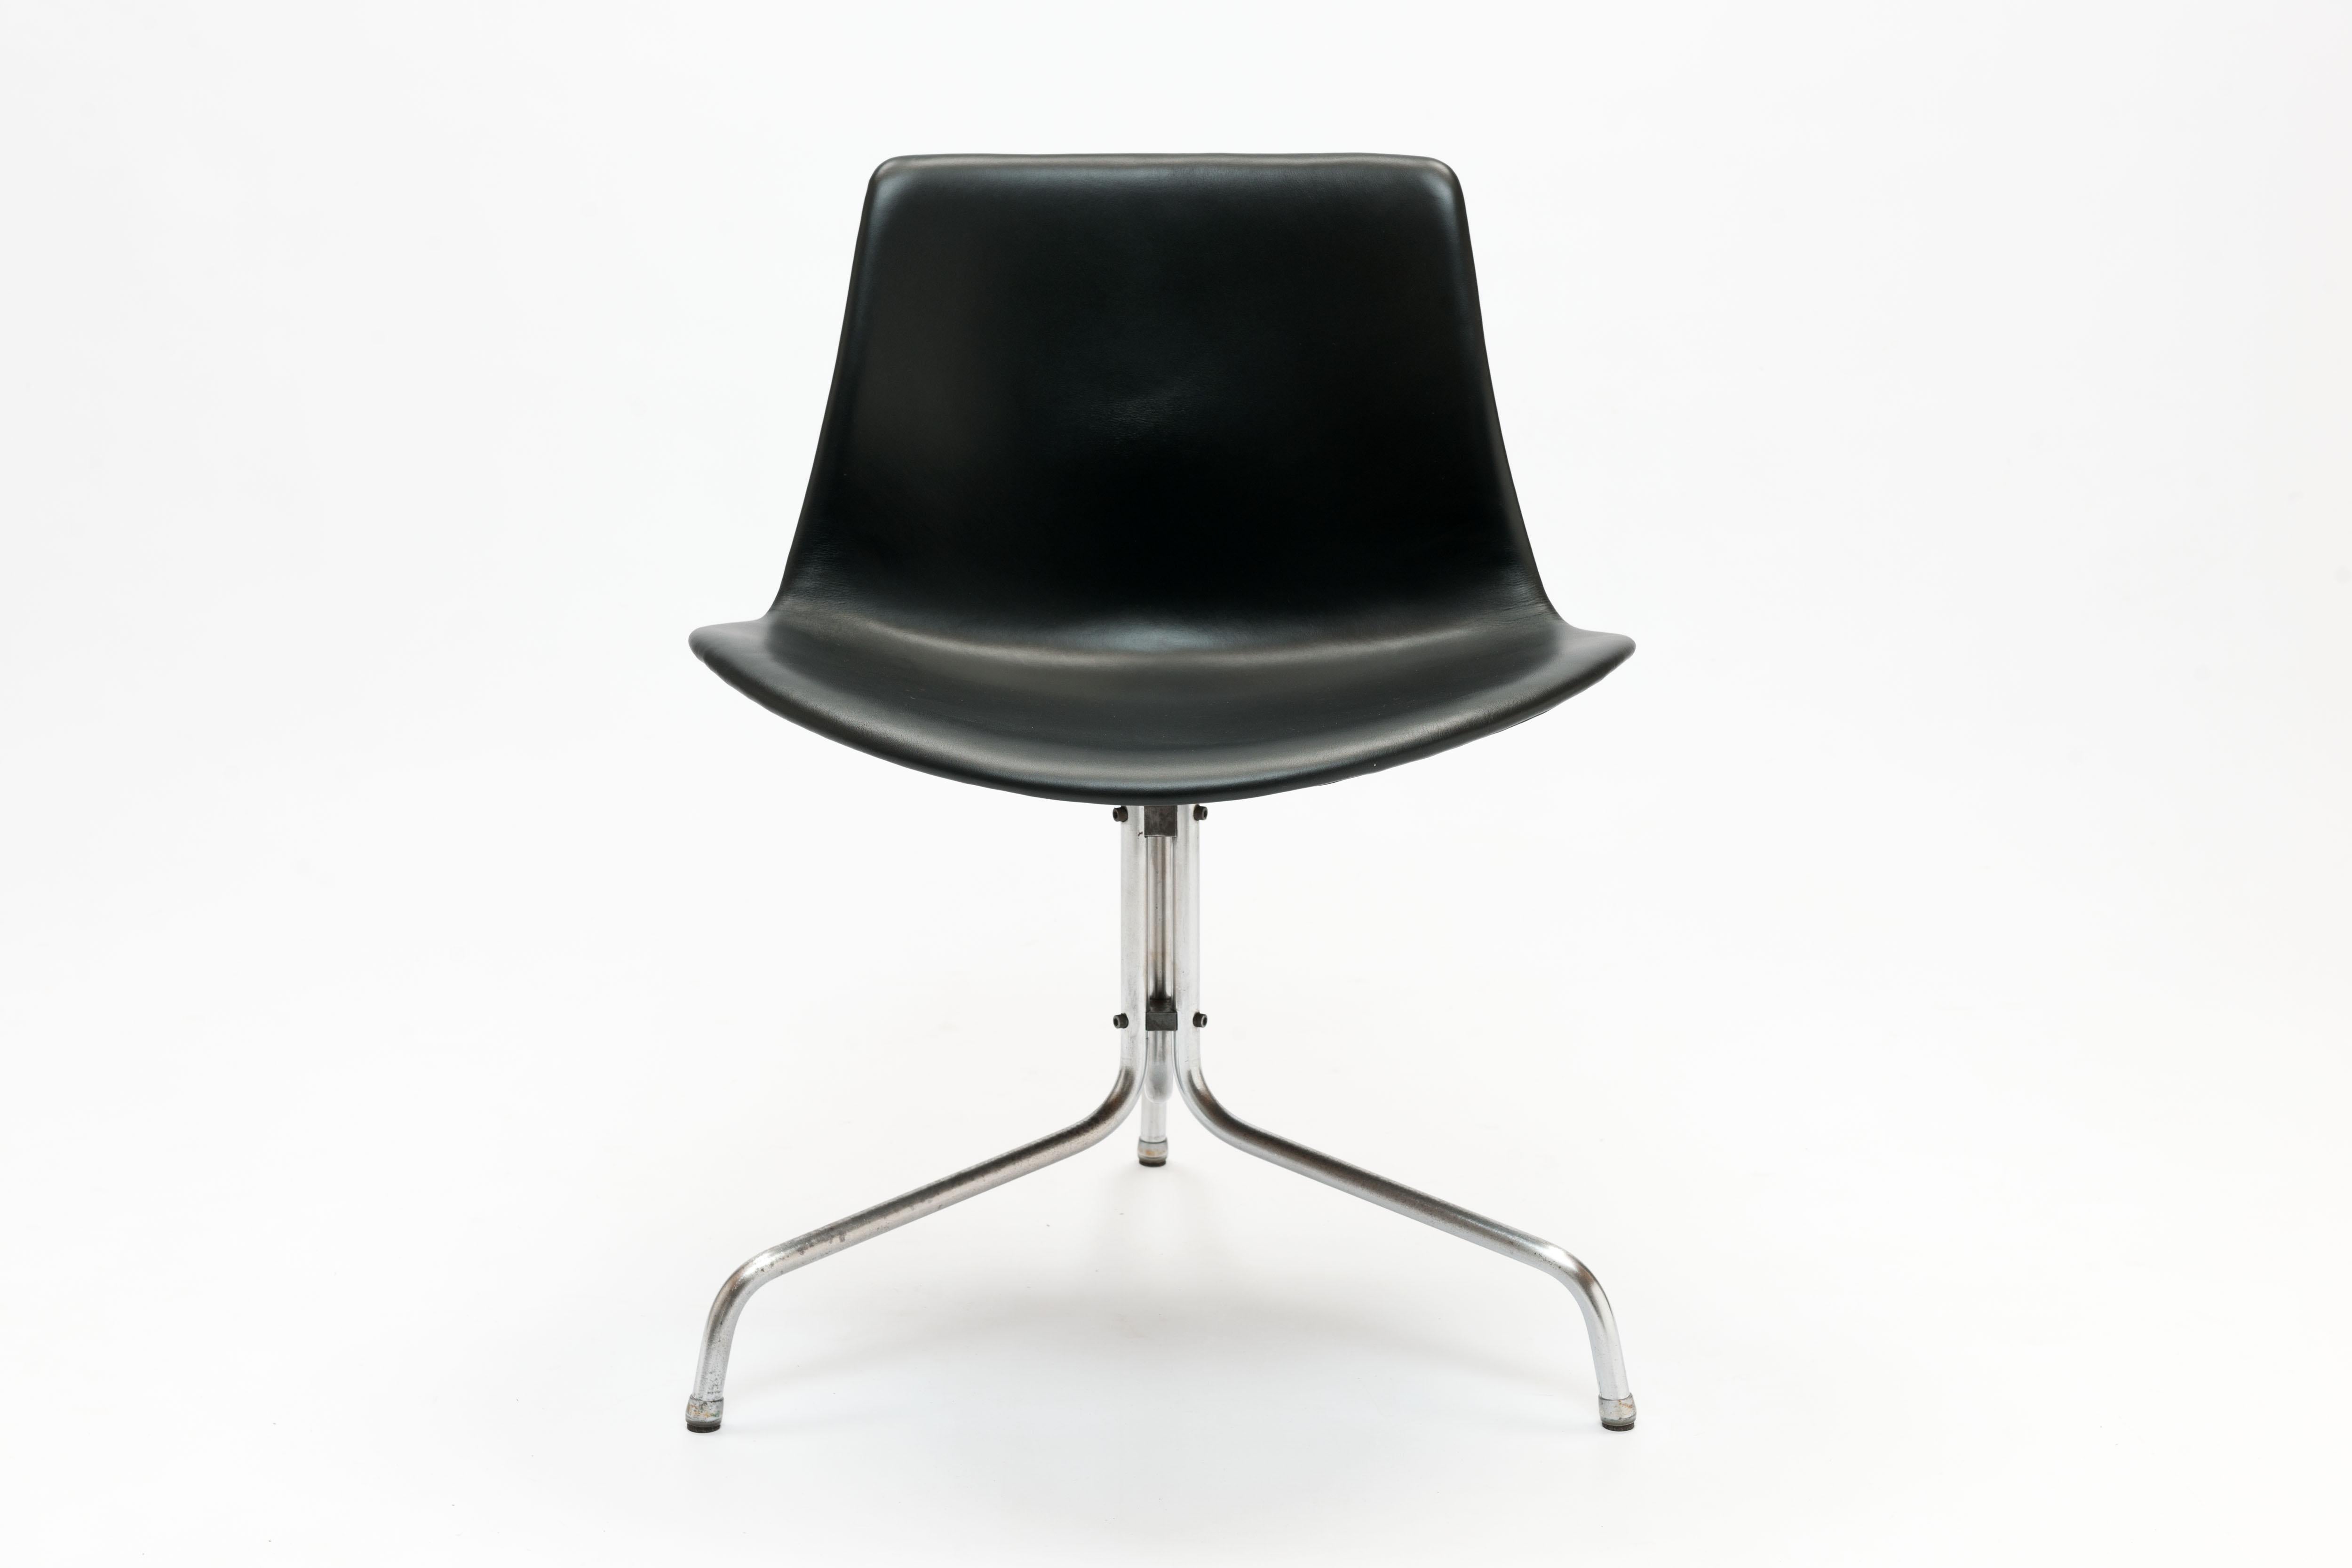 Rare model BO611 swivel chair by Jorgen Kastholm & Preben Fabricius, manufactured by Bo-Ex Denmark from 1968.
Fibreglass reinforced polyester shell upholstered in a beautiful heavy quality black aniline leather on signature characteristic